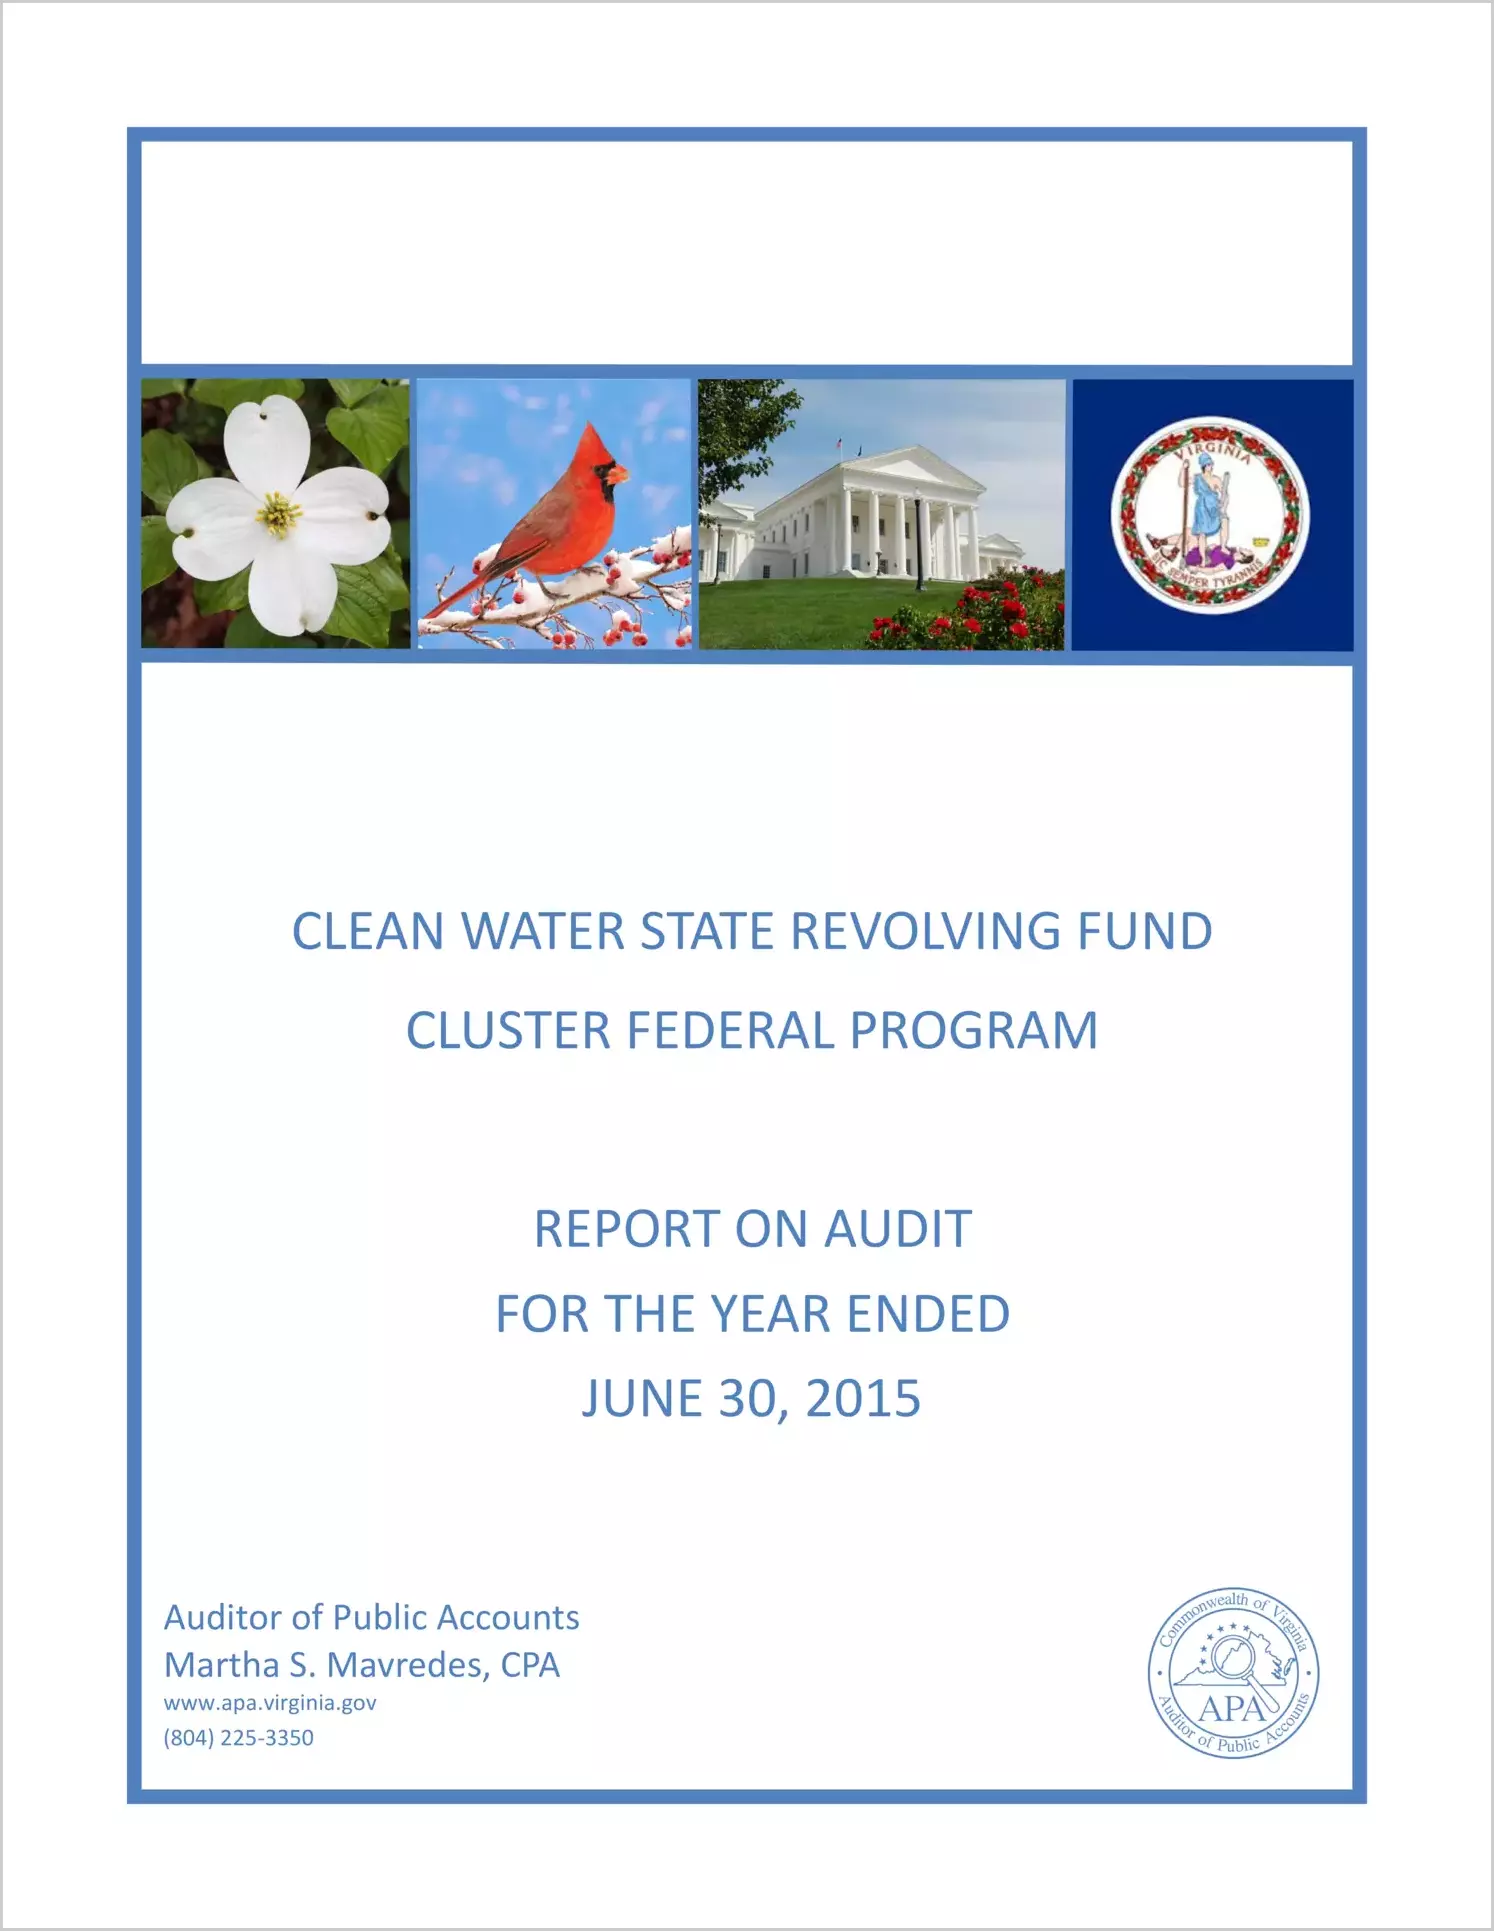 Clean Water State Revolving Fund Cluster Federal Program for the year ended June 30, 2015